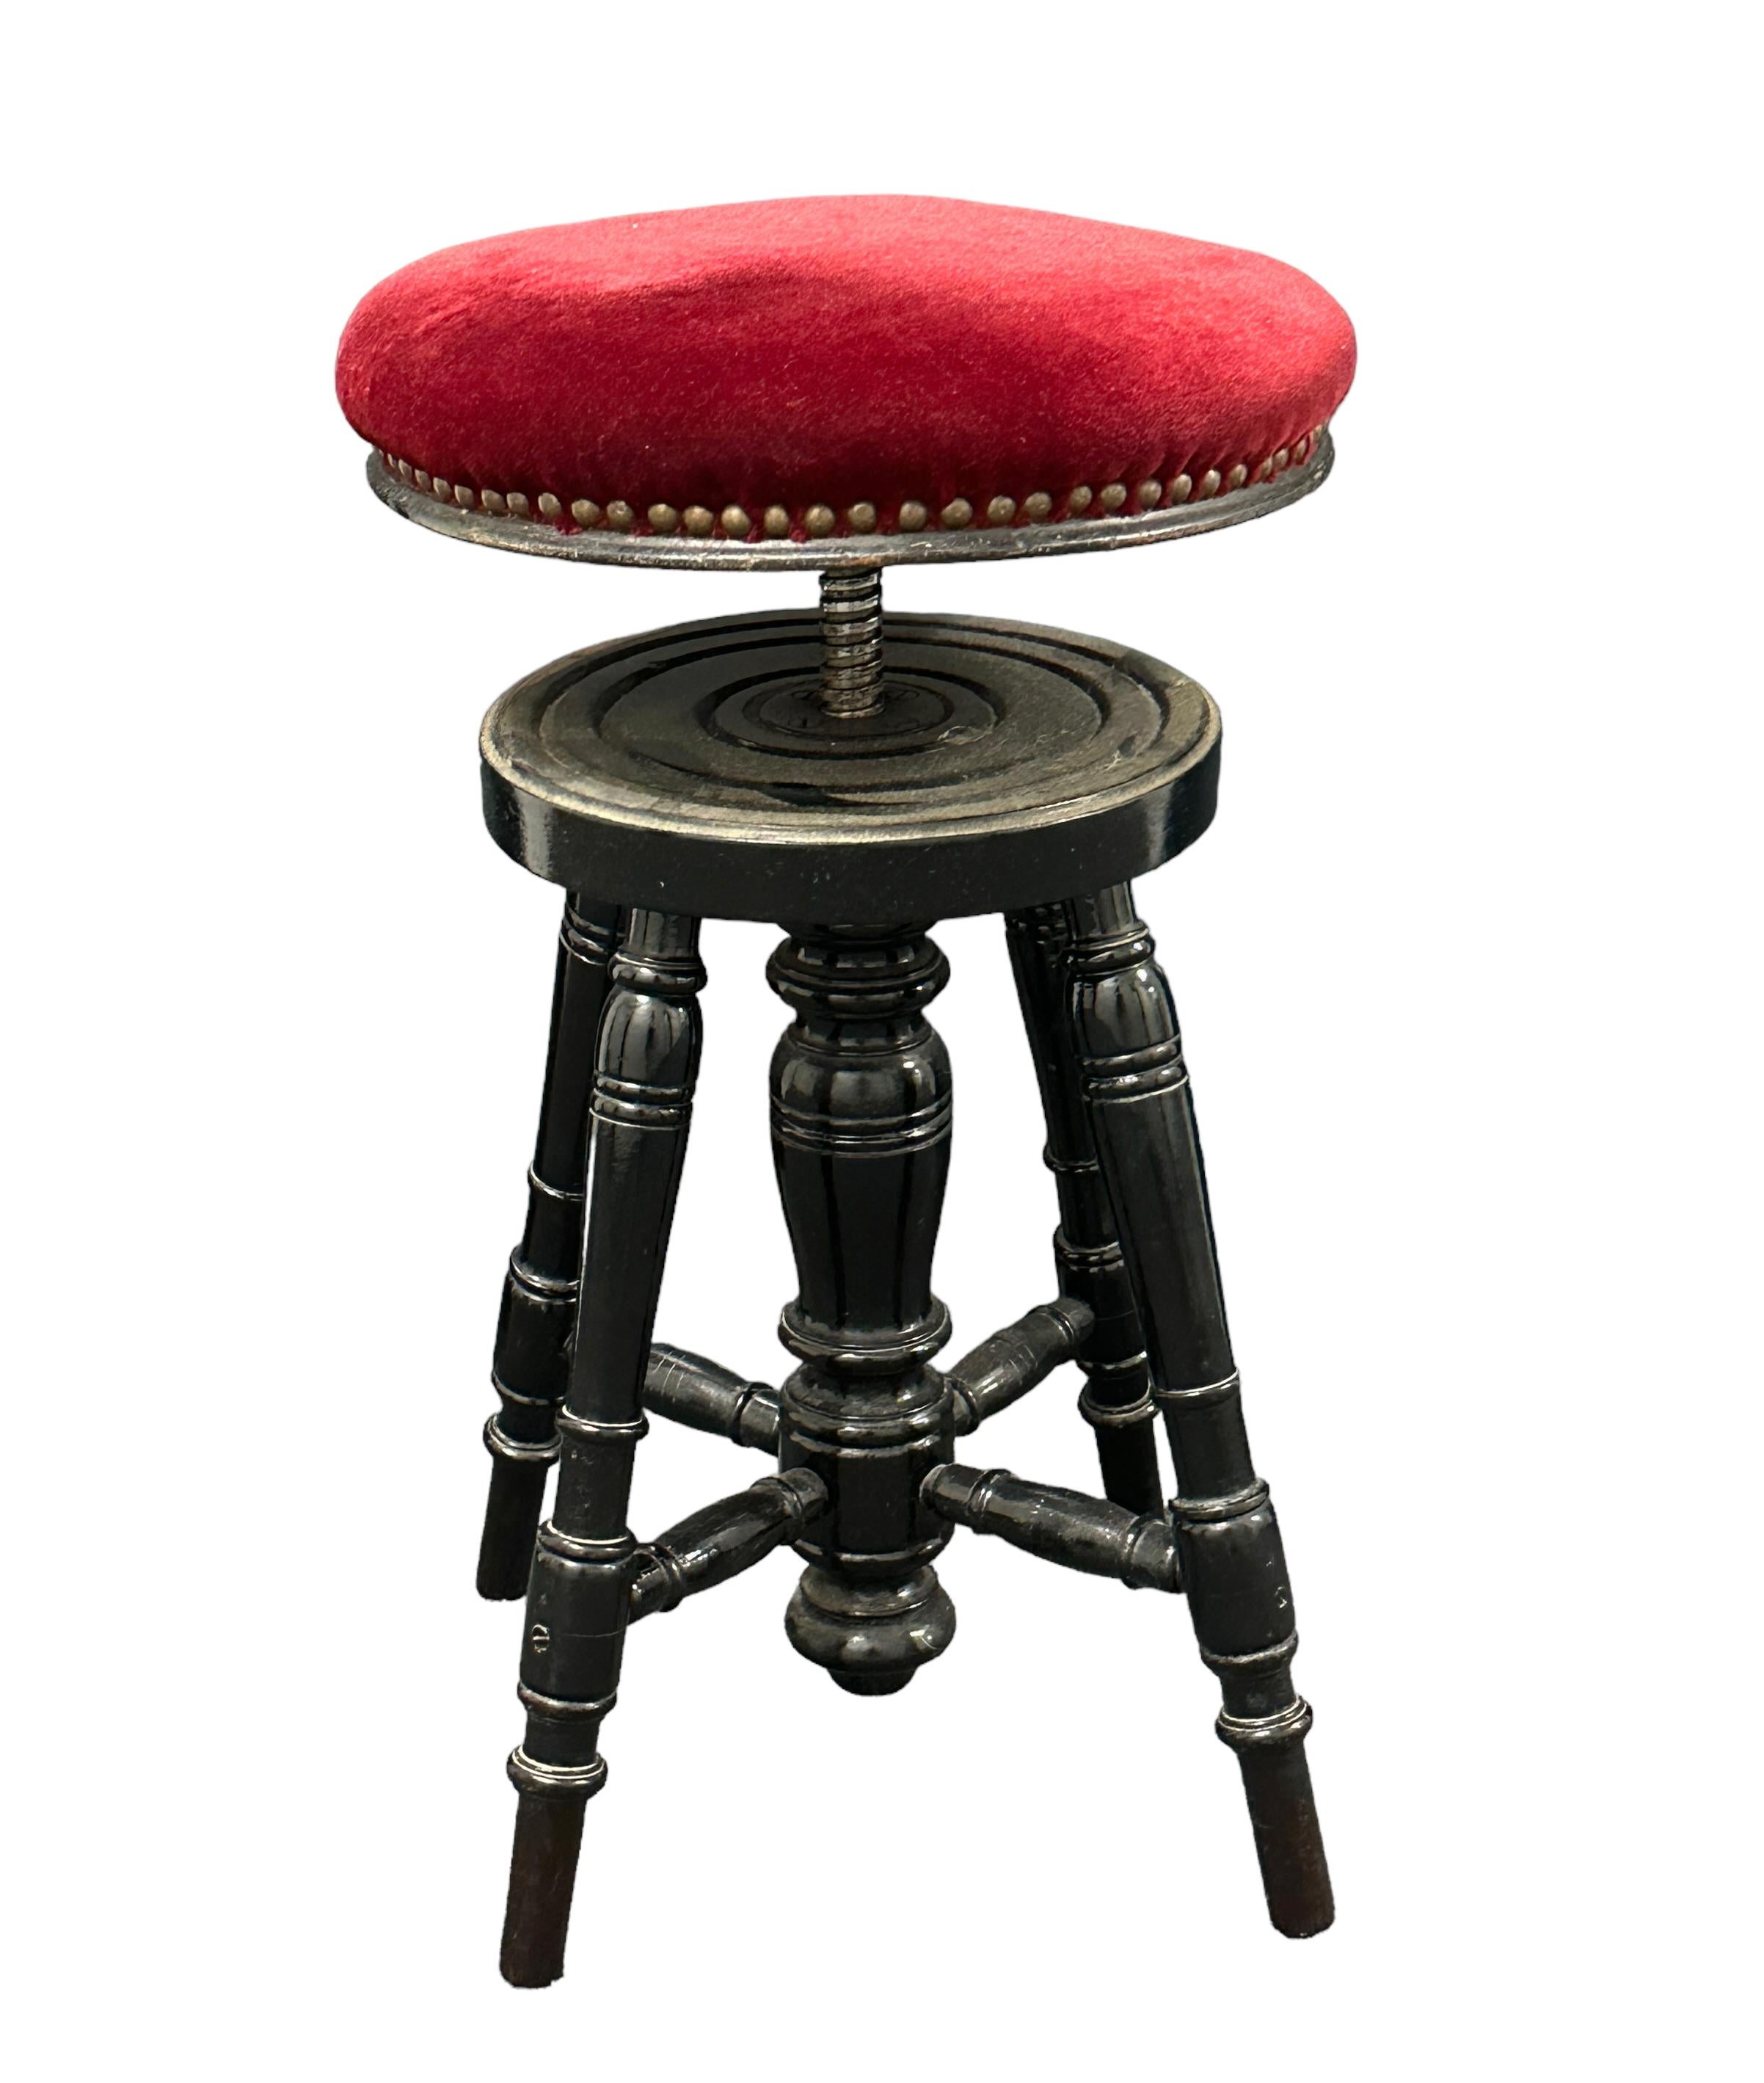 Early 20th Century Swivel Piano Stool with Red Velvet Seat, Belgium For Sale 7